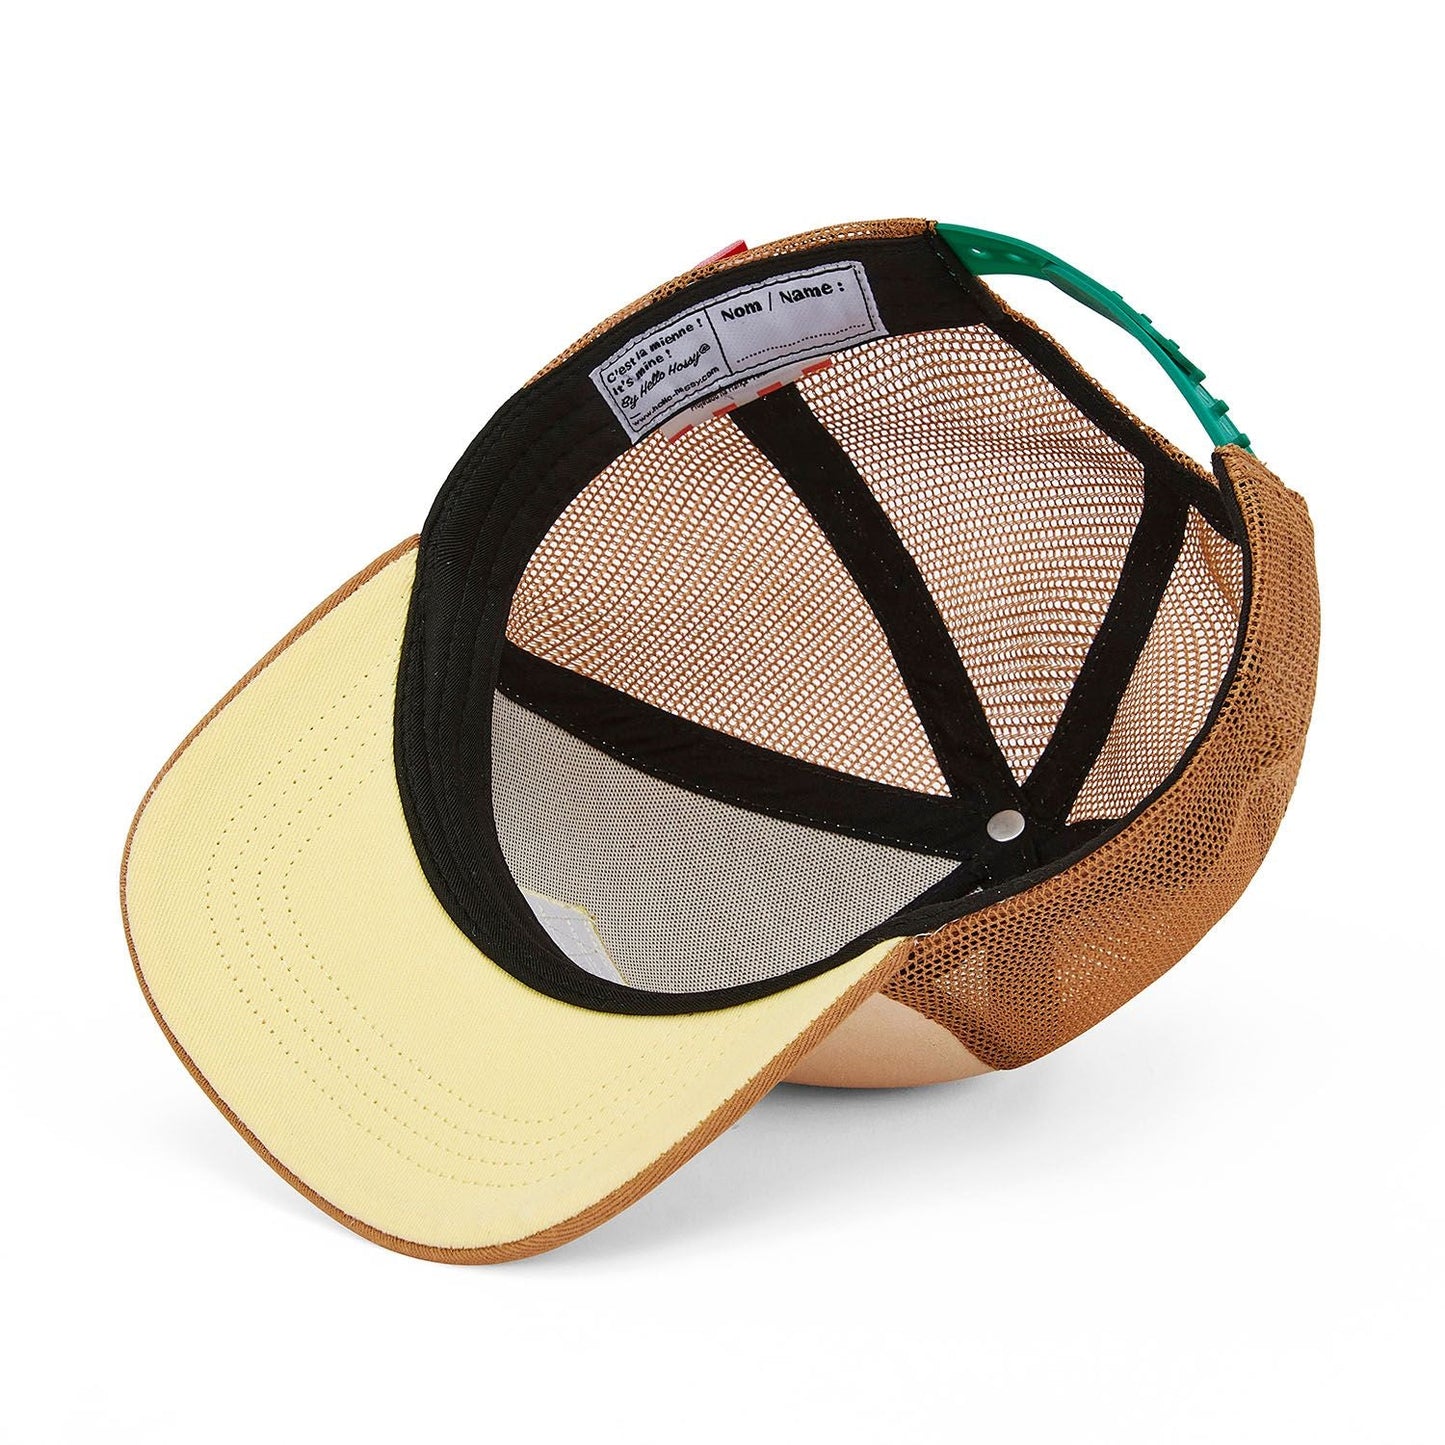 Casquette Mini Iced Coffee 9-18 mois - Cool kids Only - Hello Hossy